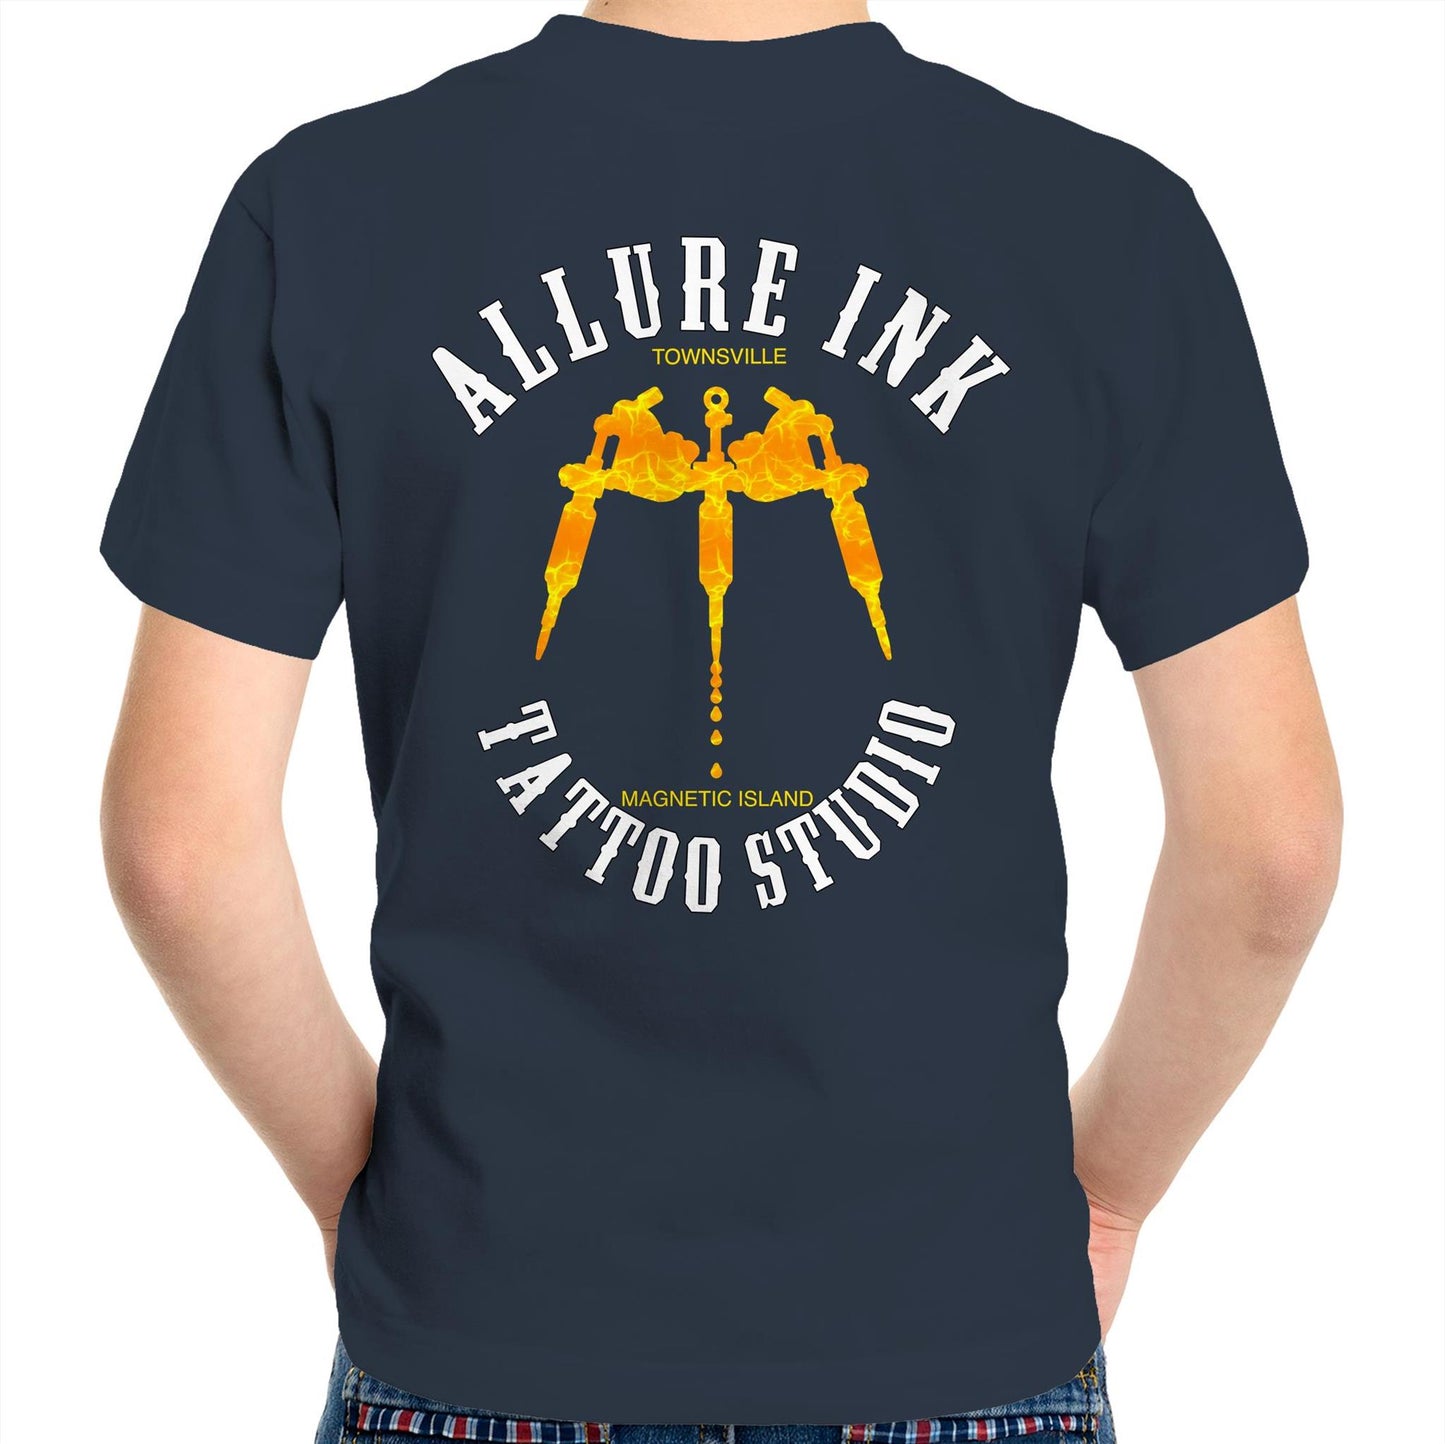 Kids Allure ink Townsville and Magnetic Island t shirt